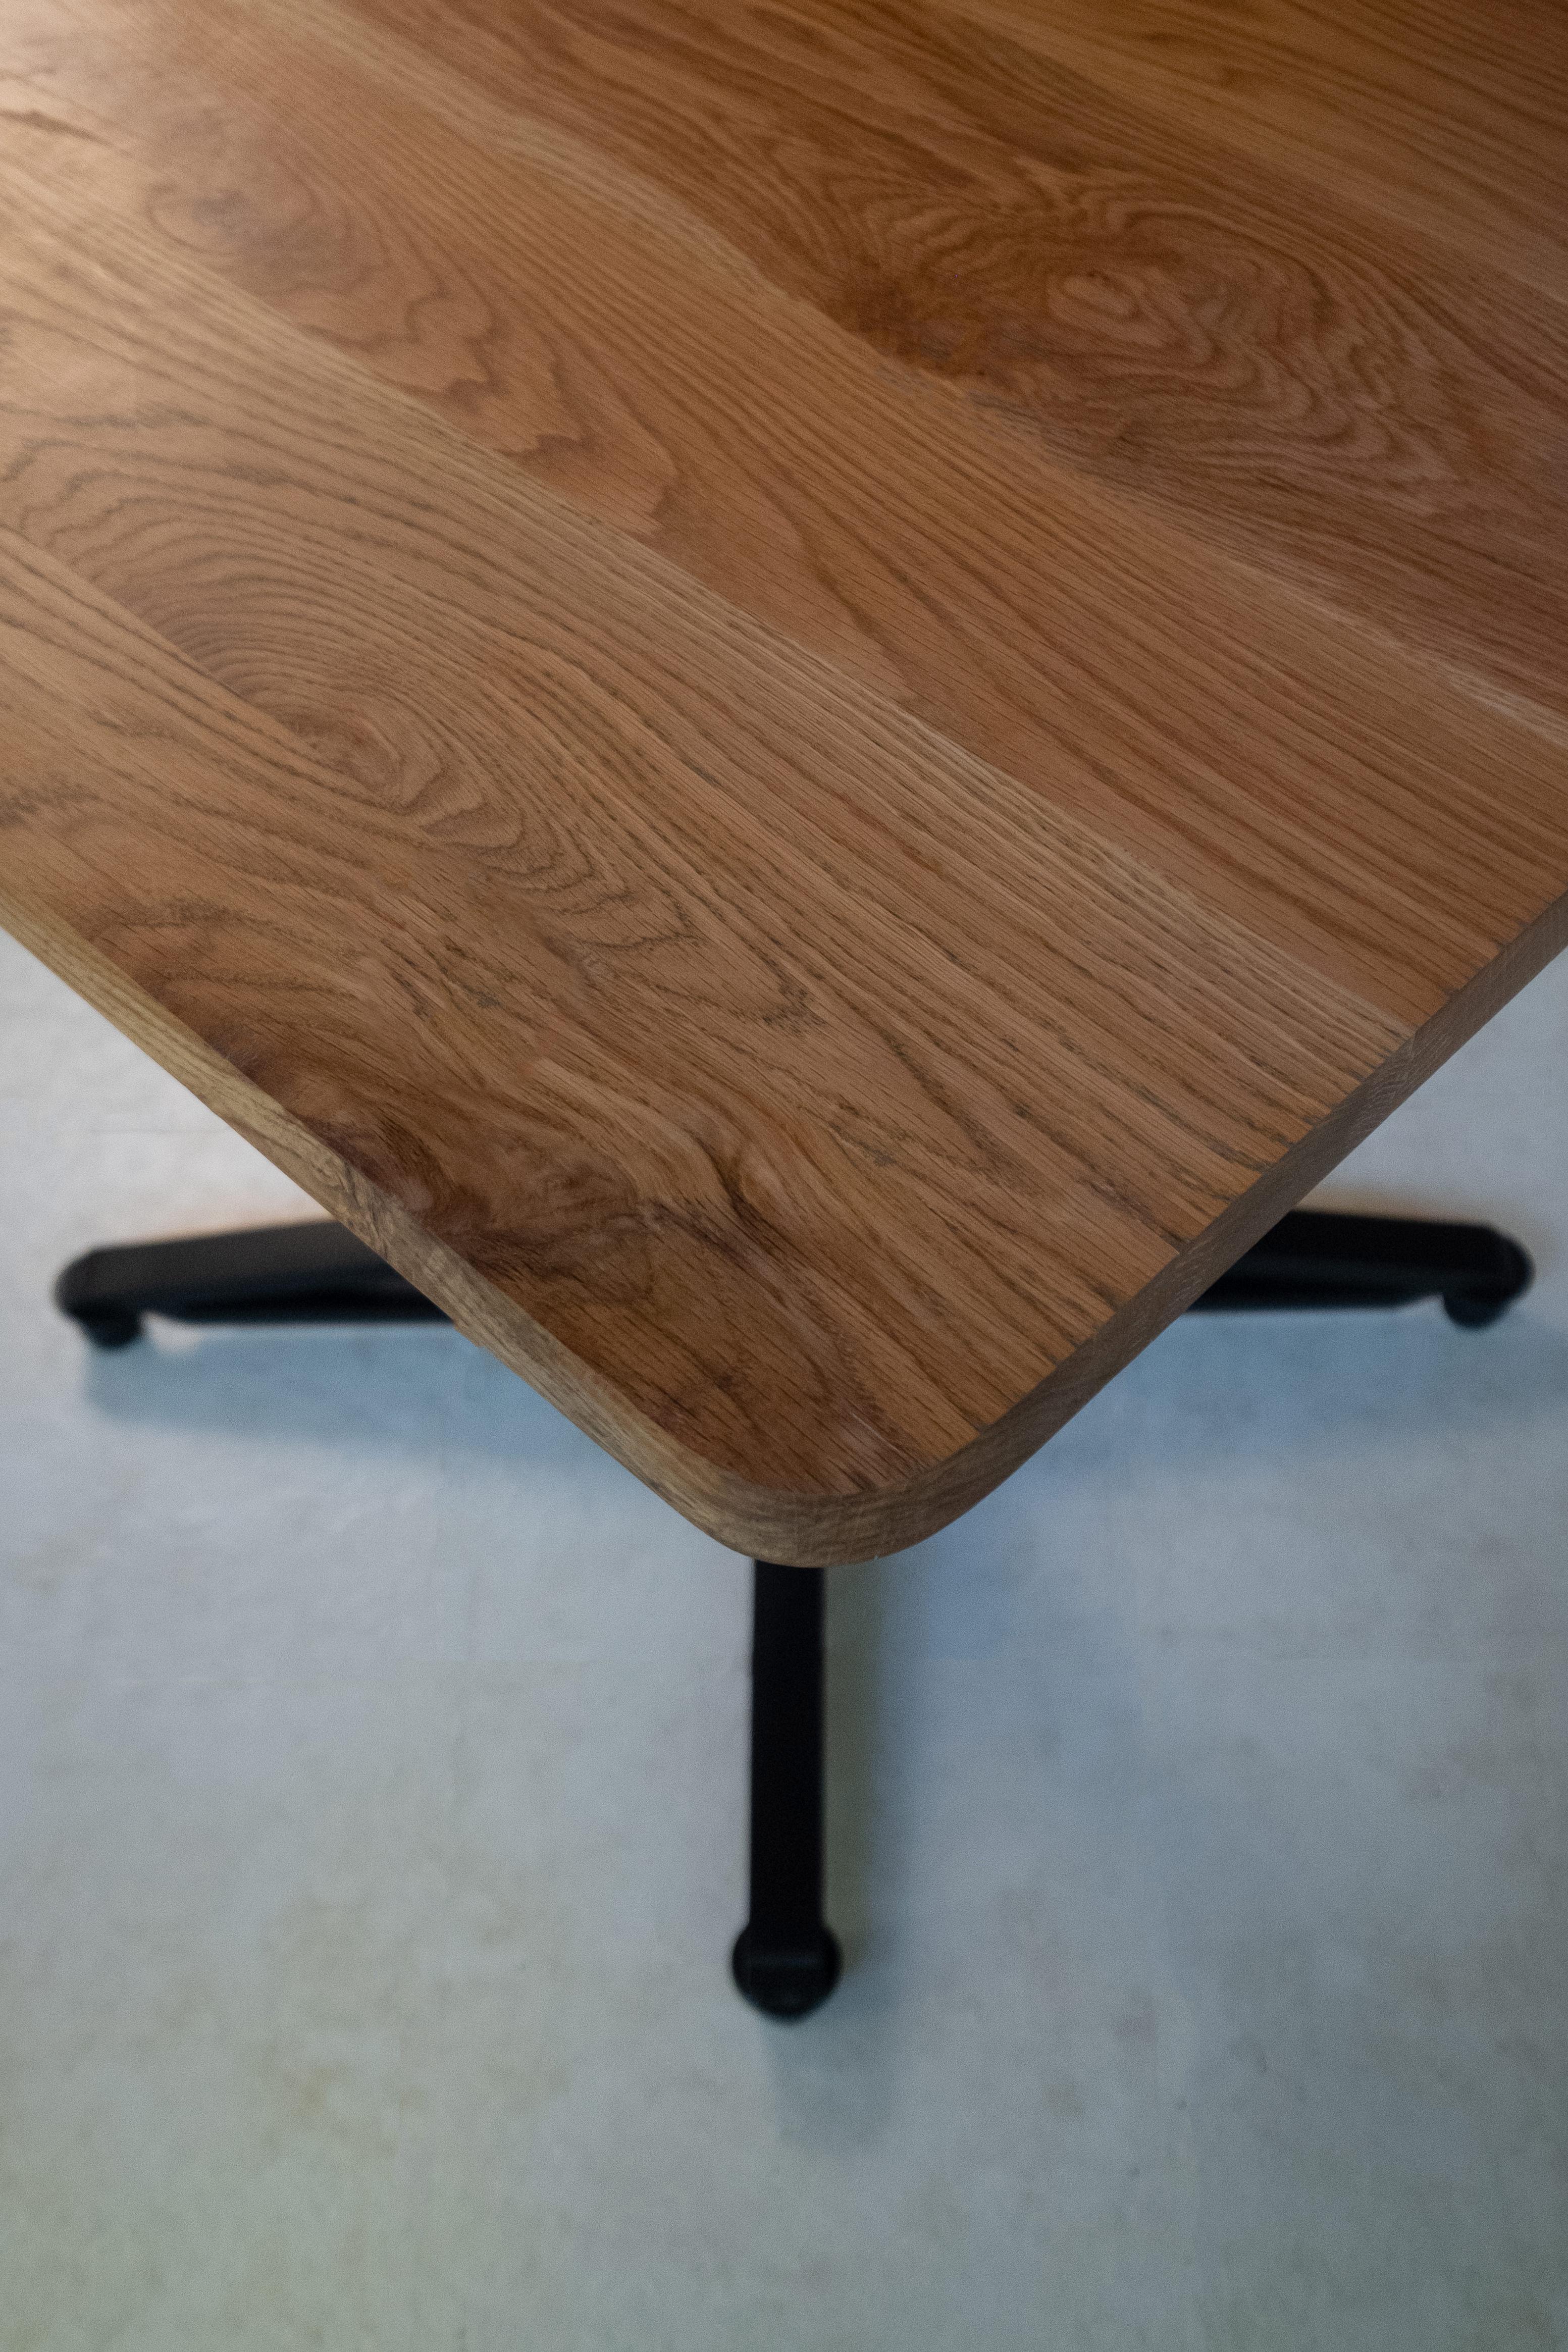 Oiled Horizon Table with wood table top and black mild steel base For Sale